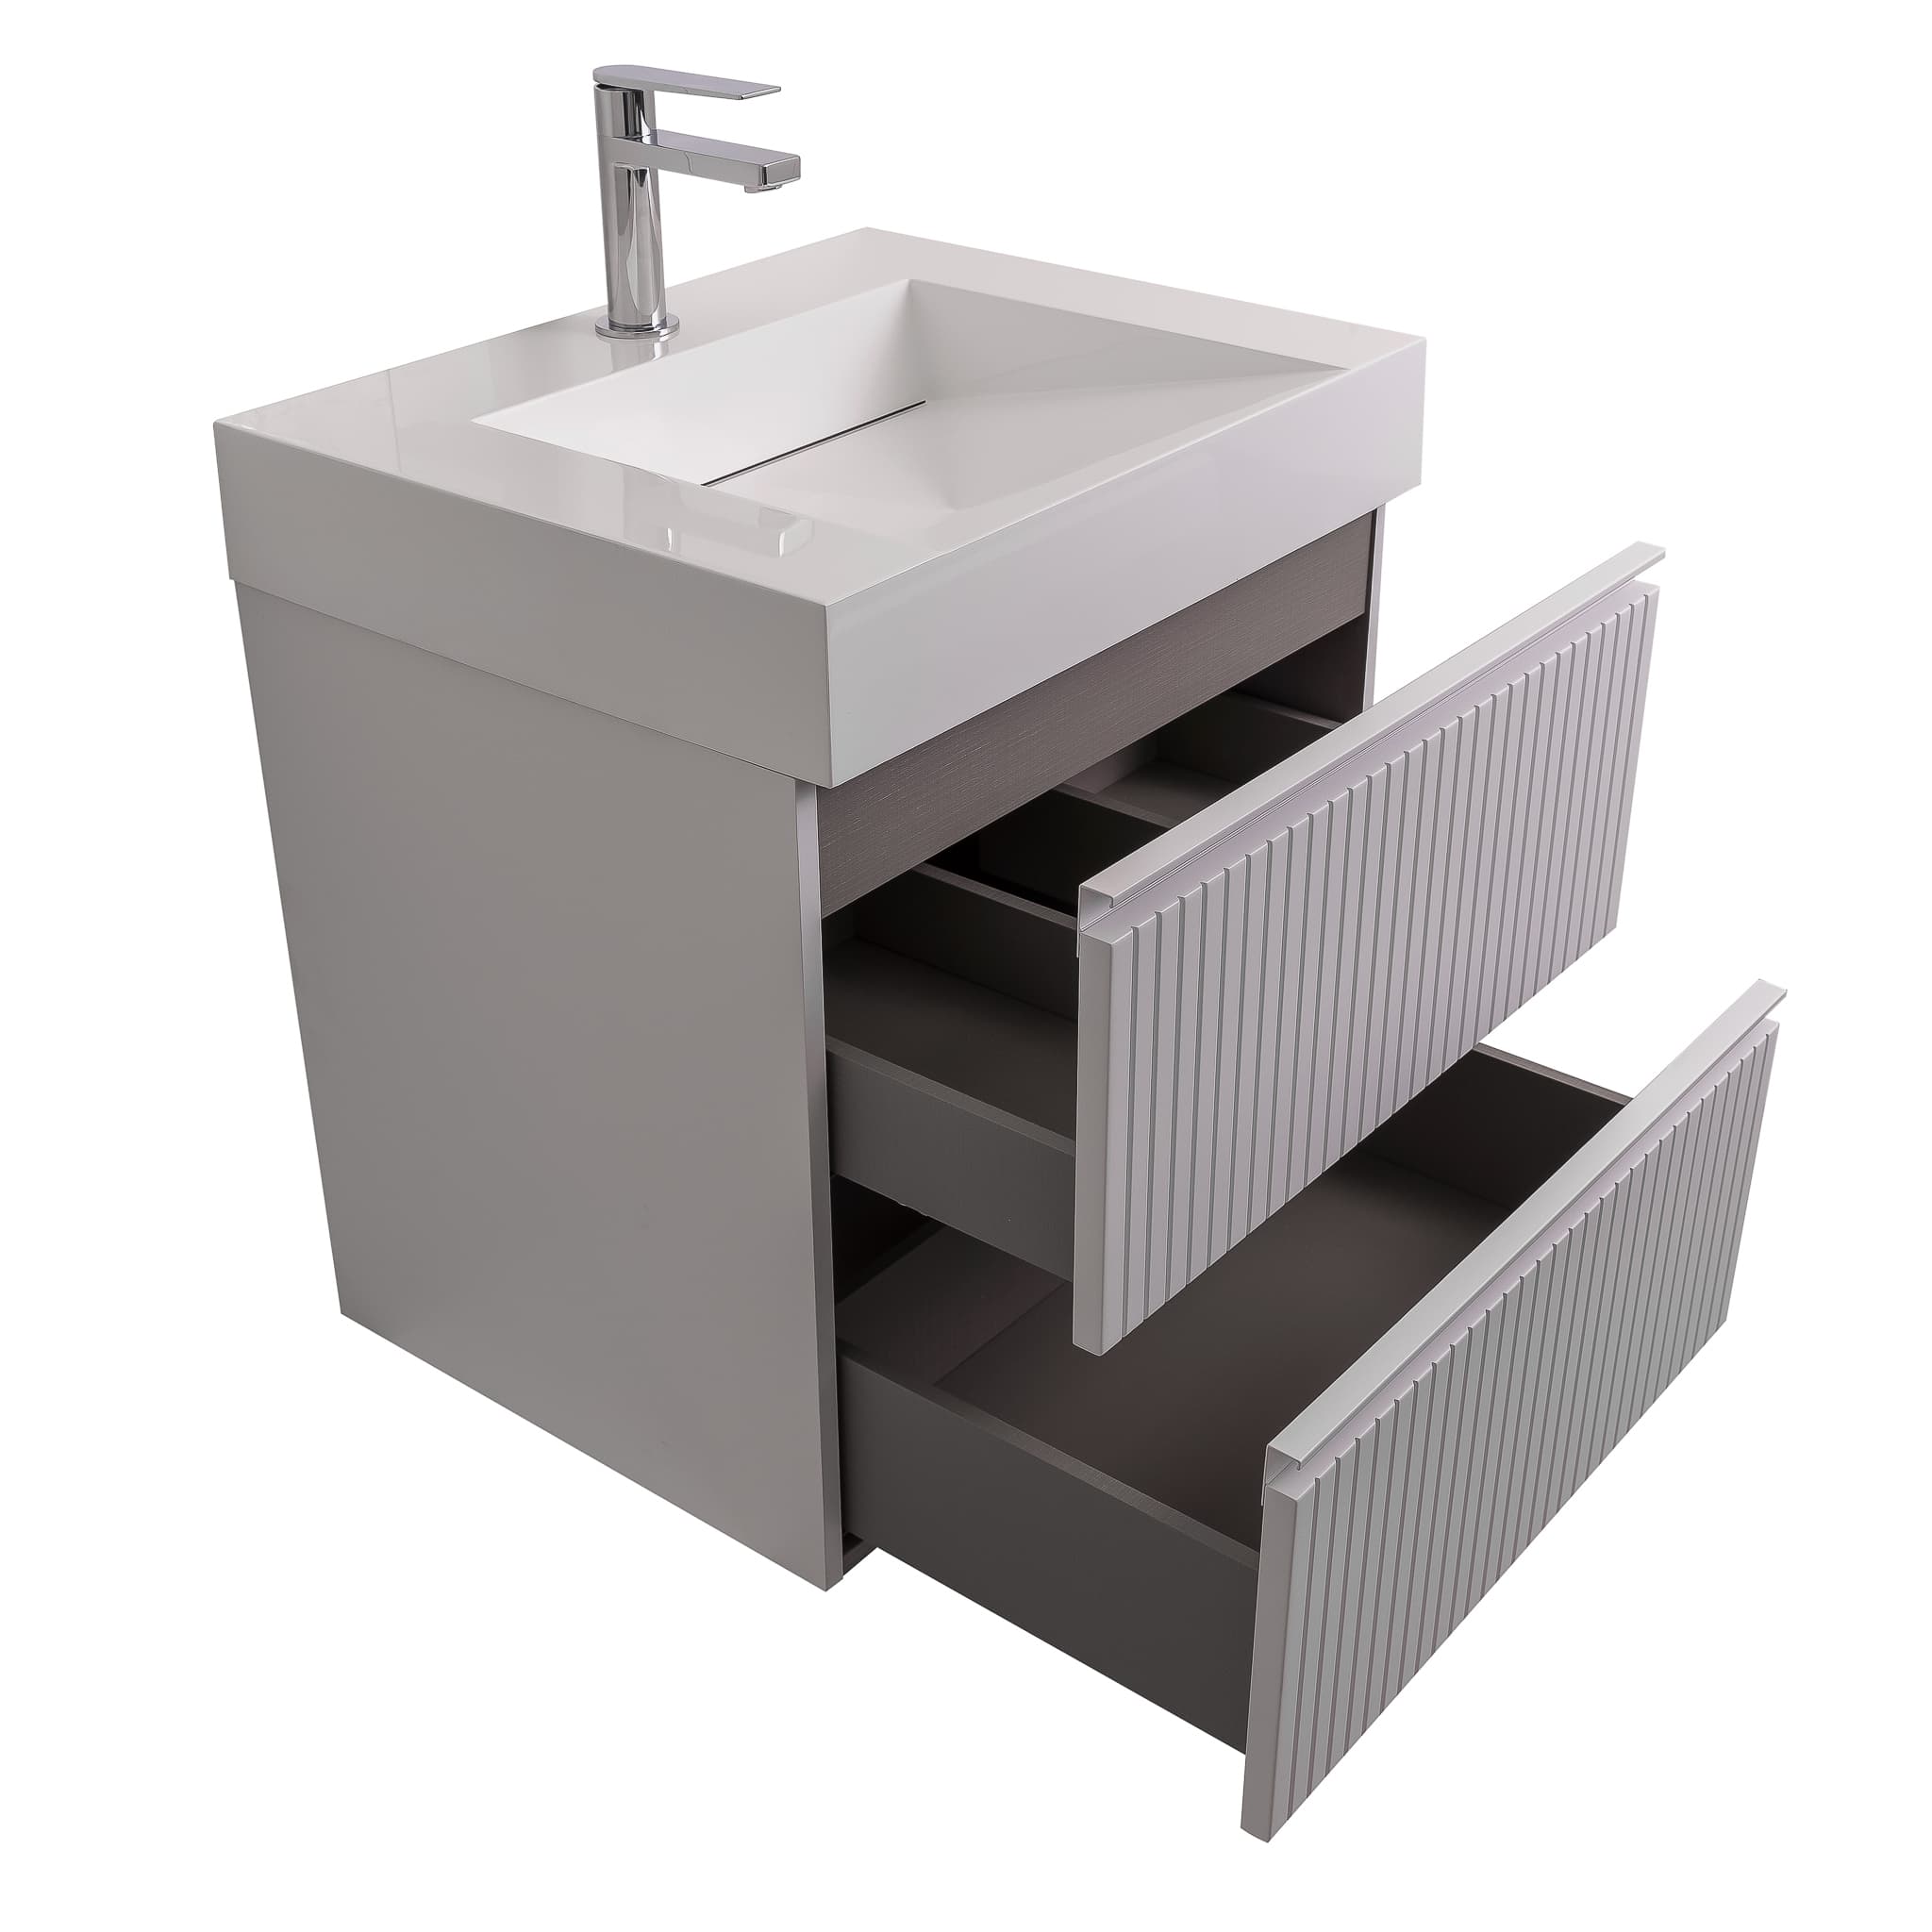 Ares 23.5 Matte White Cabinet, Infinity Cultured Marble Sink, Wall Mounted Modern Vanity Set